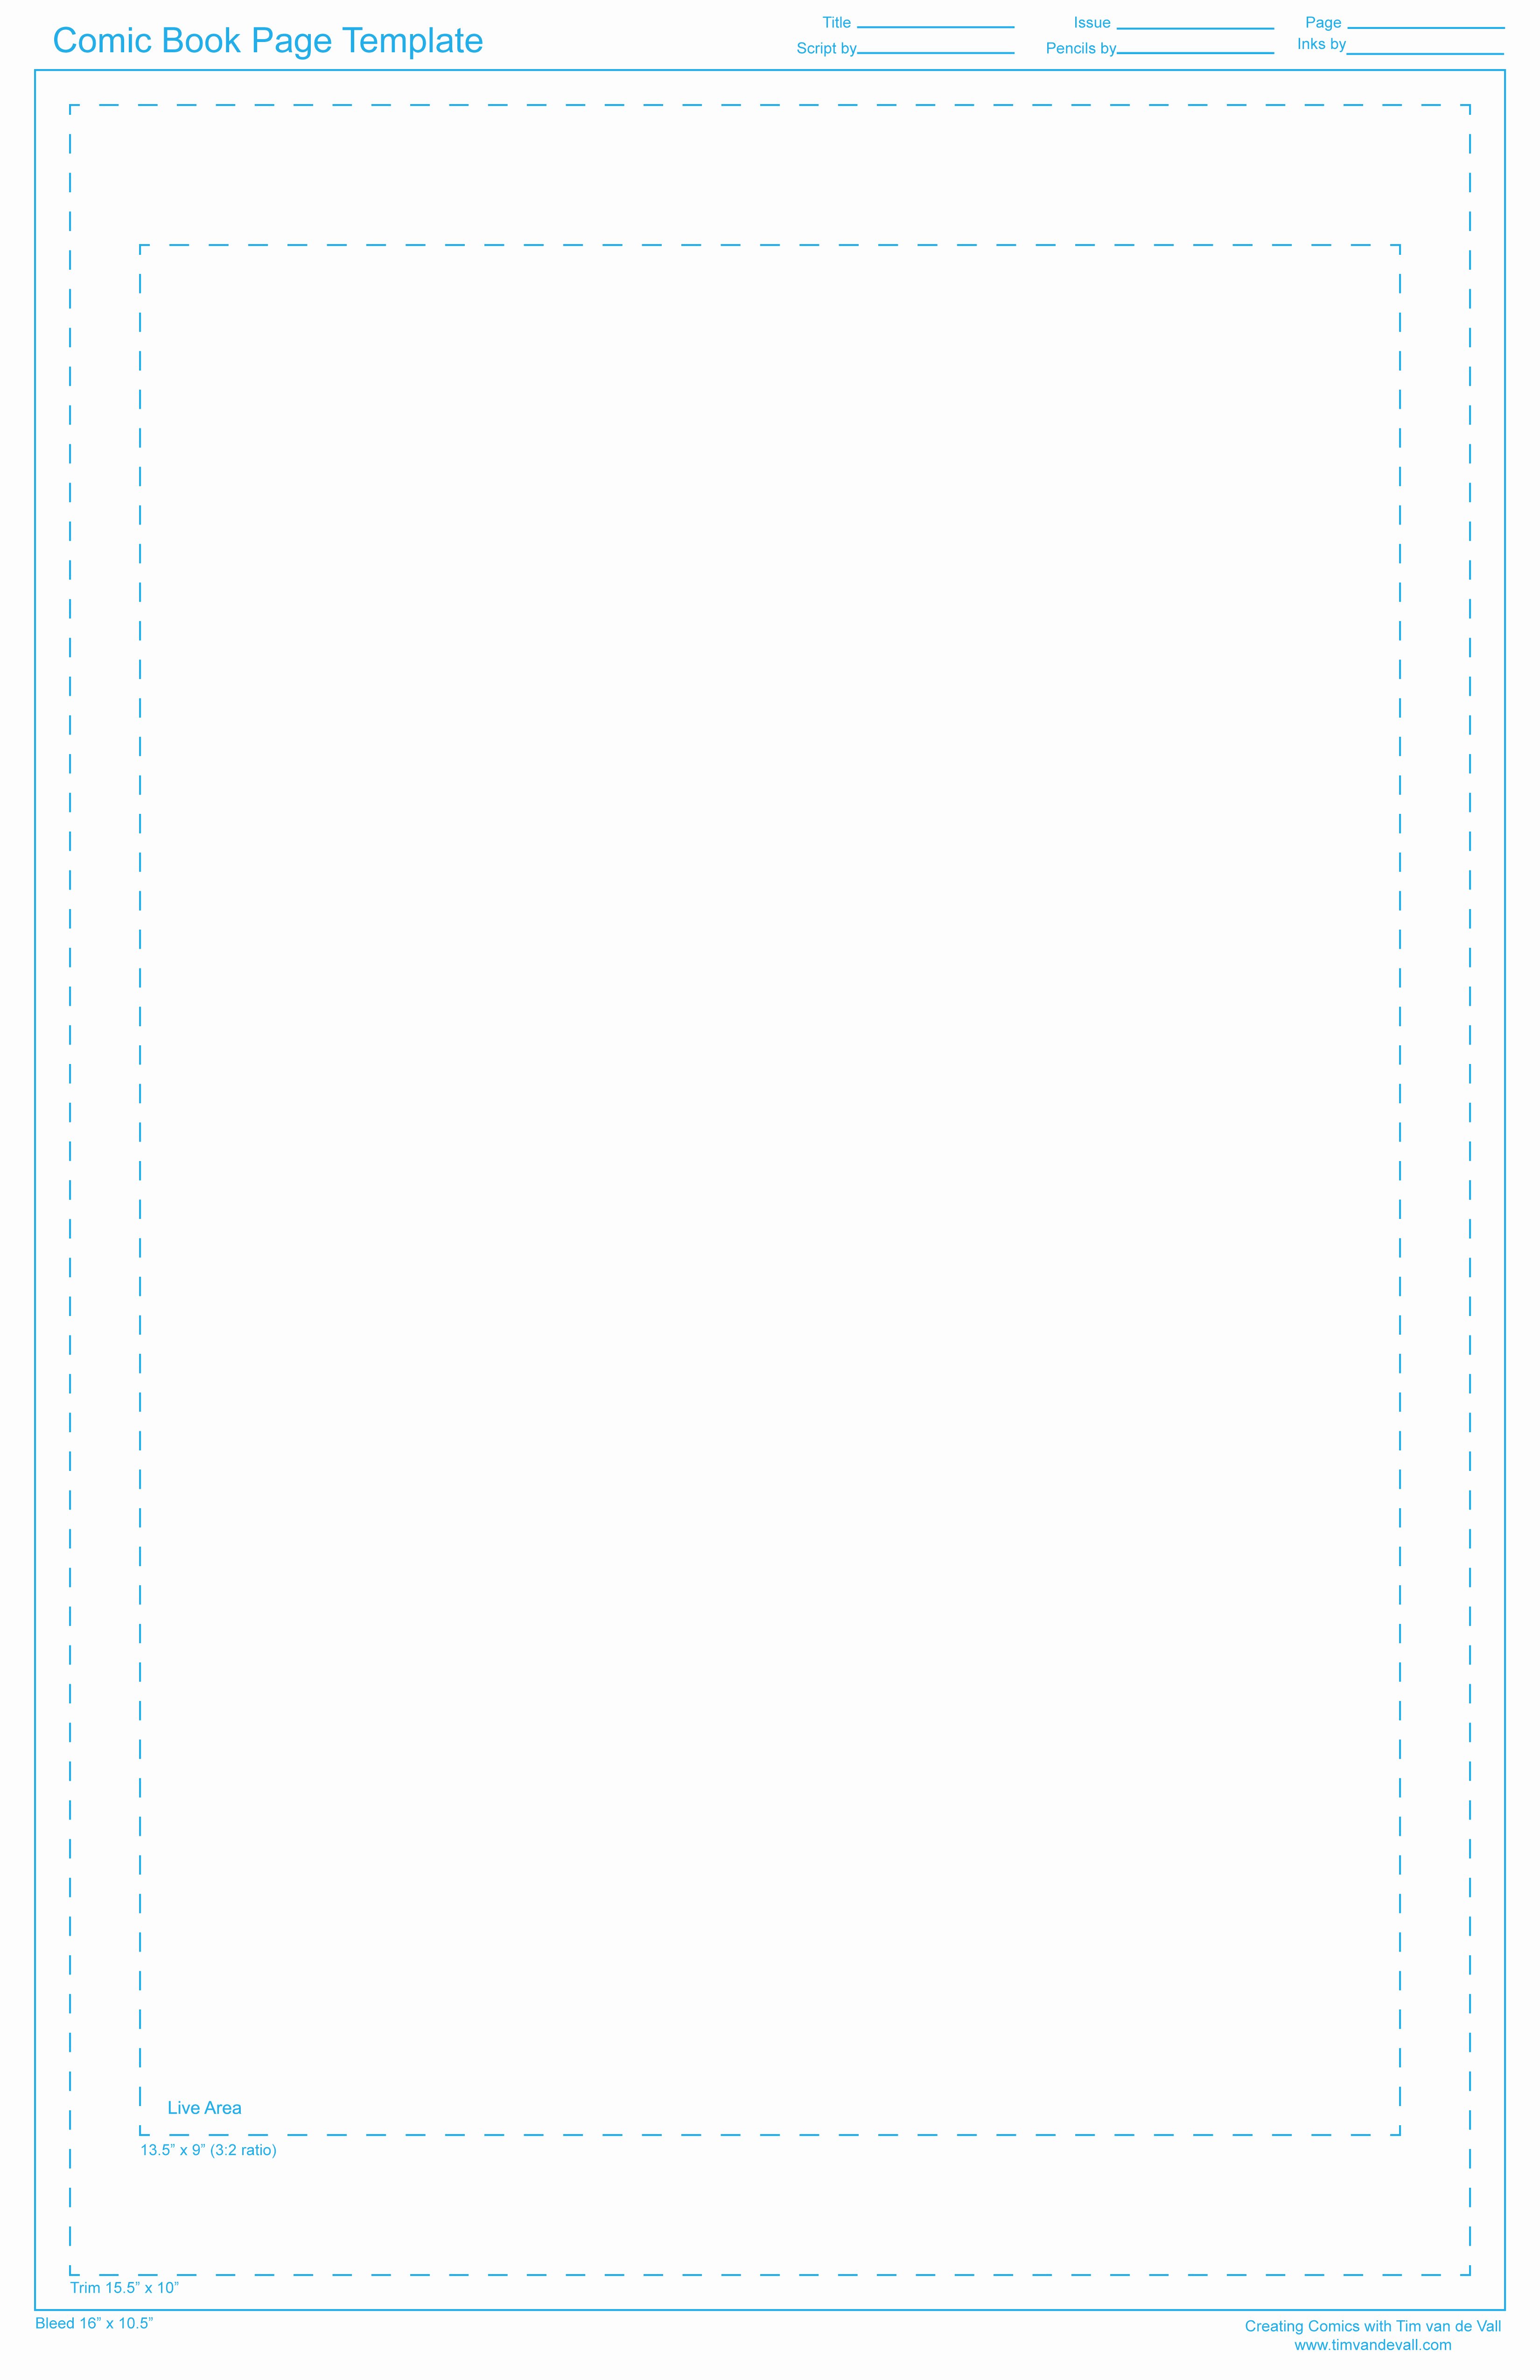 Comic Book Template Photoshop Awesome Free Ic Book Page Template Creating Ics with Tim Van De Vall